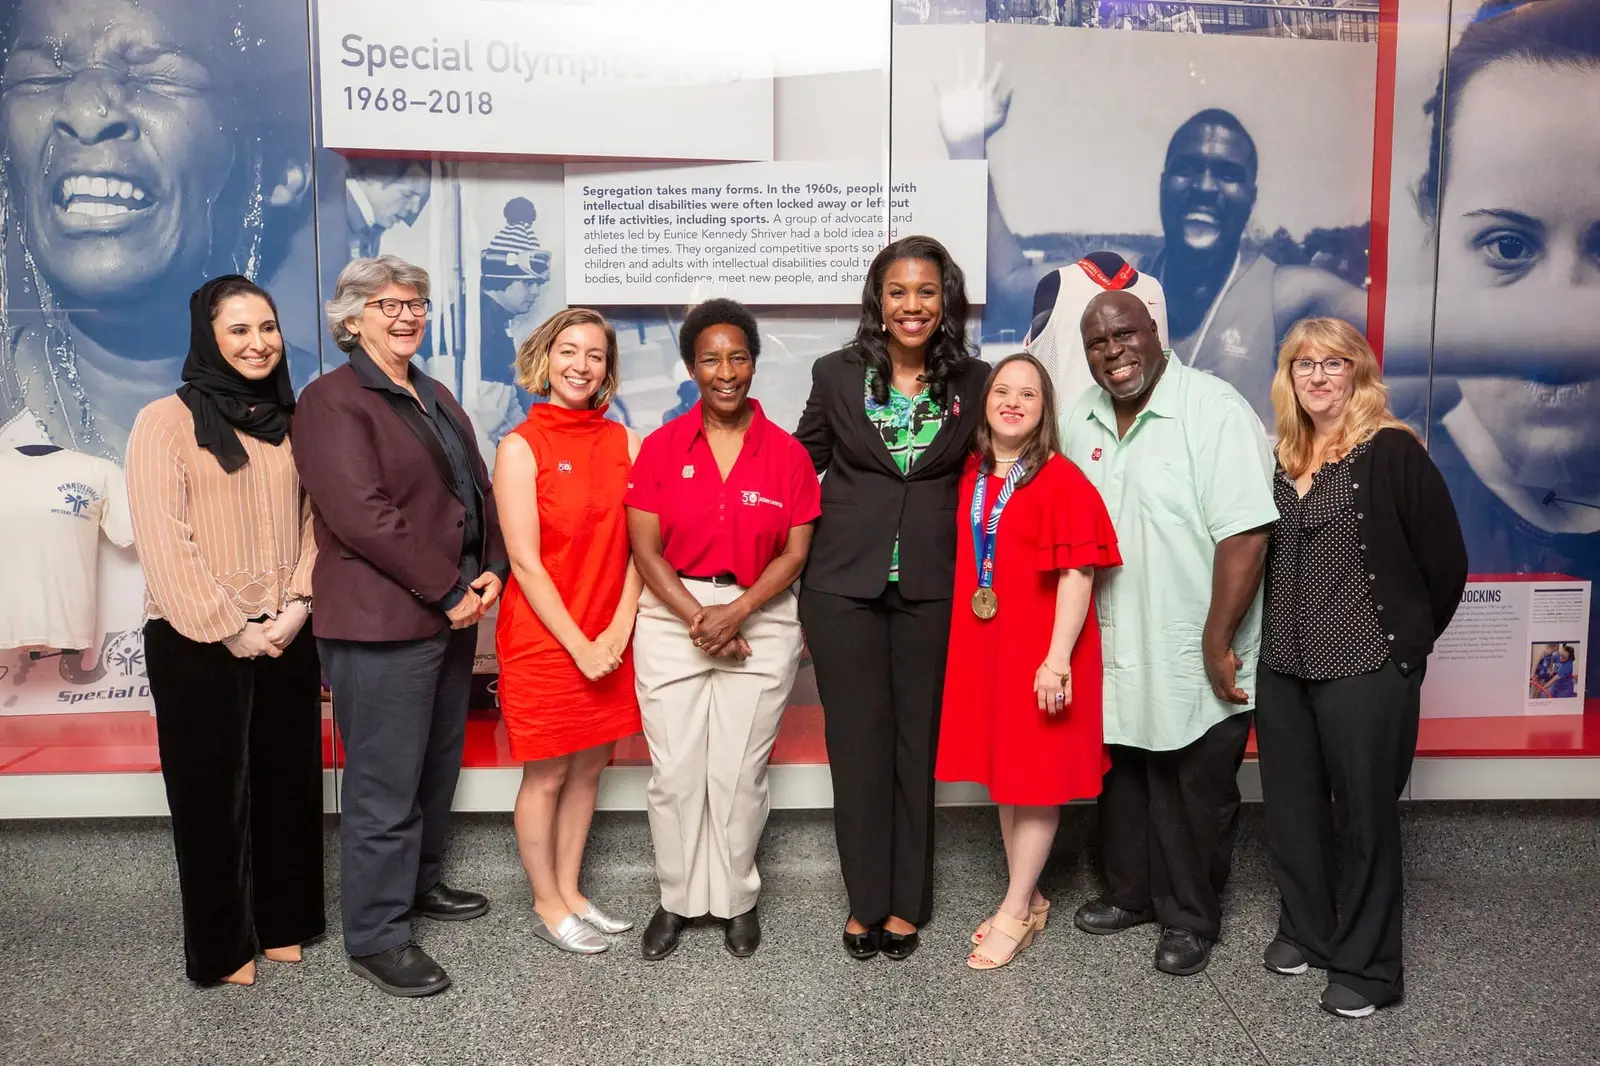 UAE Embassy Honors 50 Years of Special Olympics Movement During Event at Smithsonian's National Museum of American History